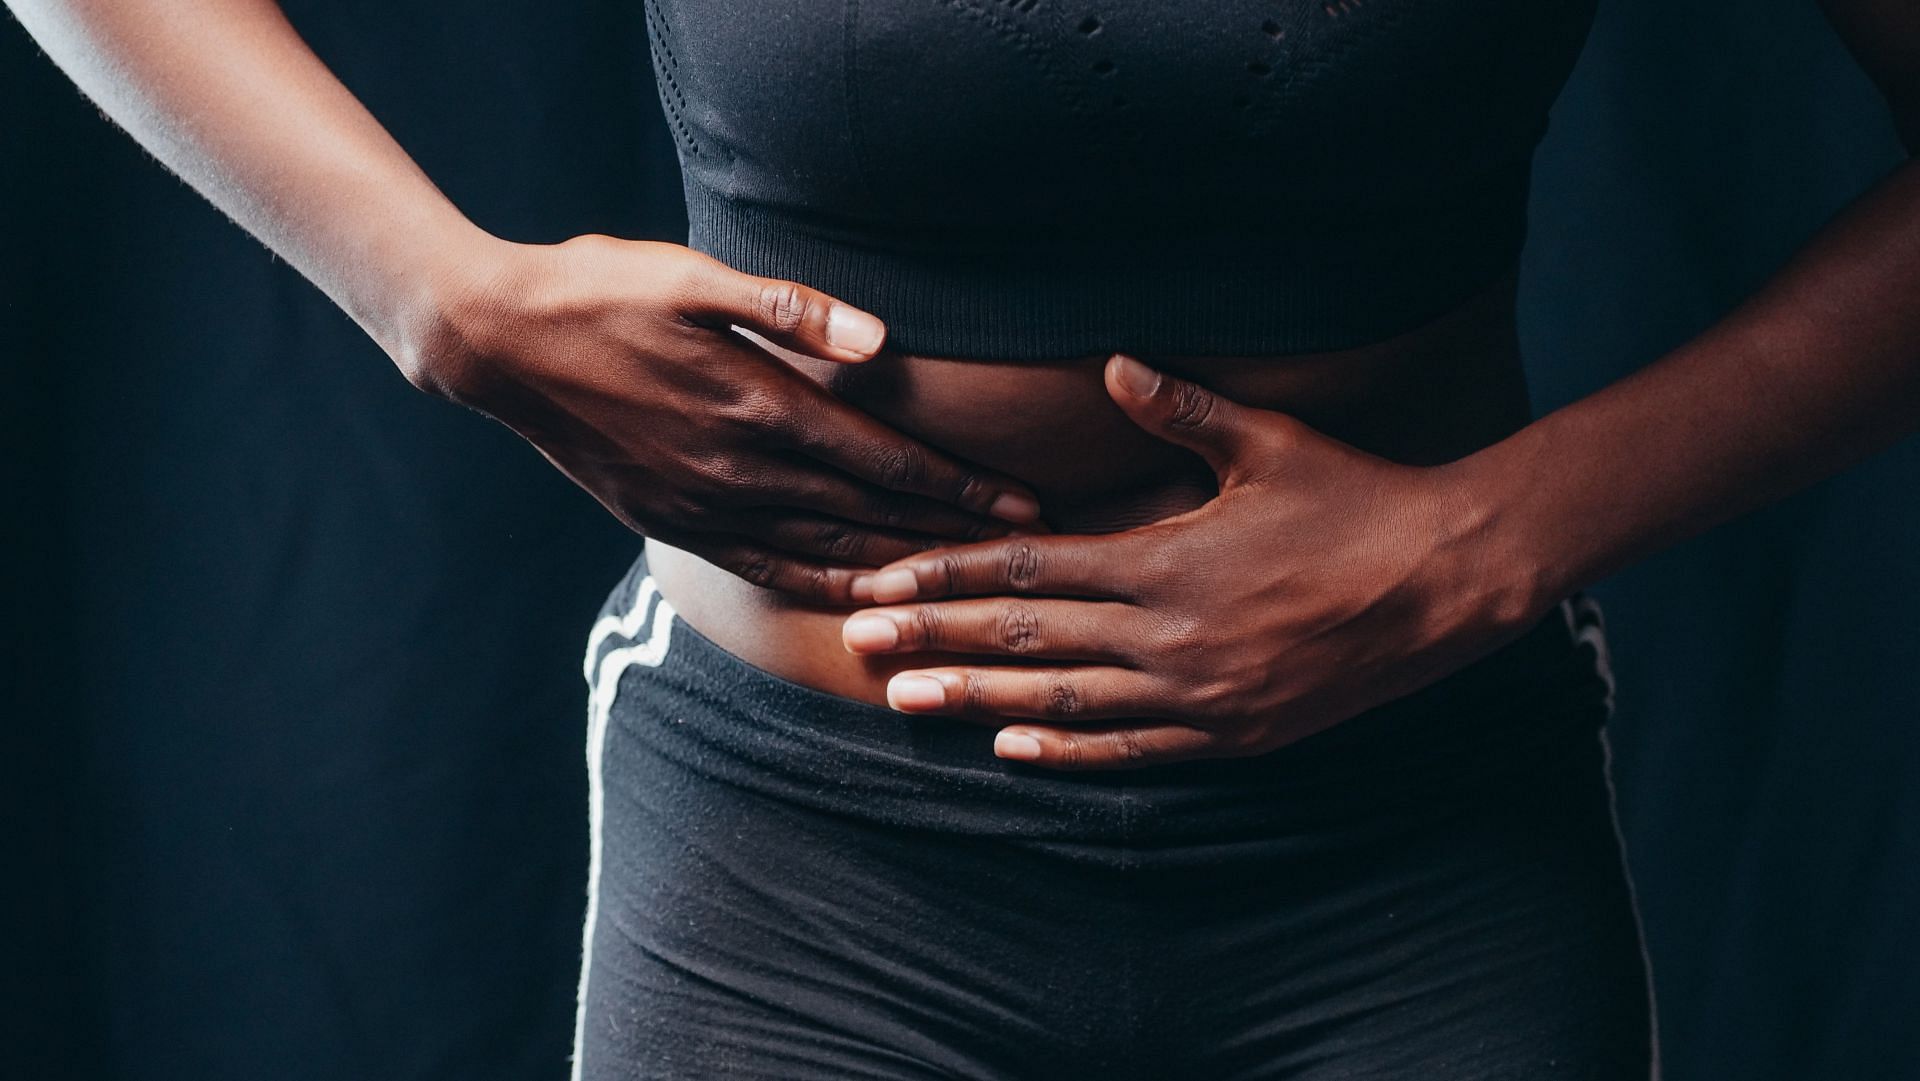 Ascites are the buildup of fluid in the abdominal cavity. (Image via Pexels)